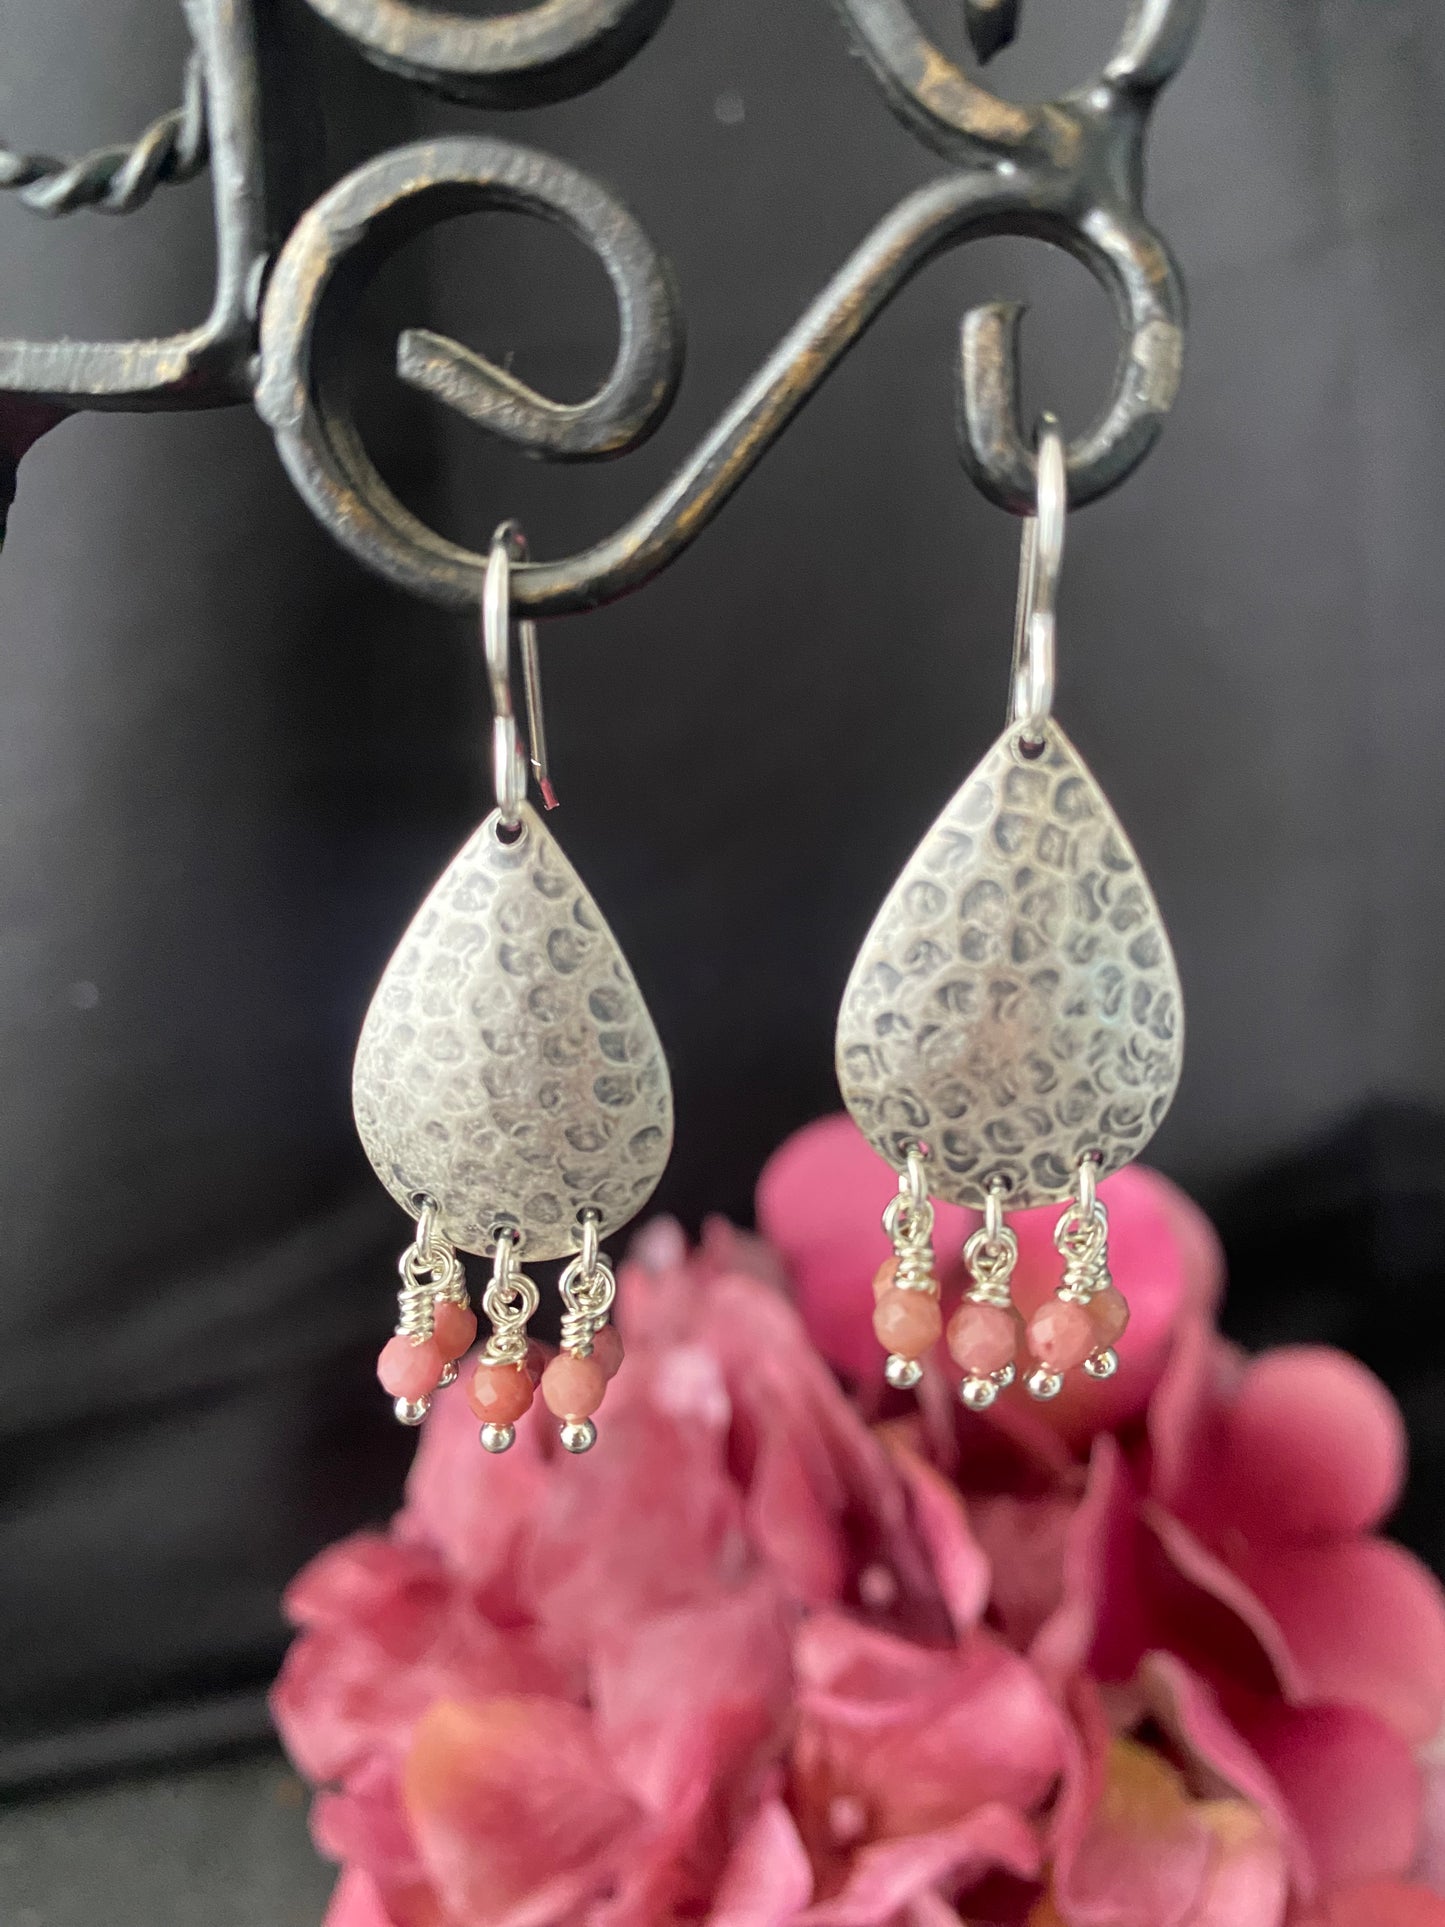 Silver earrings . Hammered silver charms, pink stone, sterling silver jewelry.